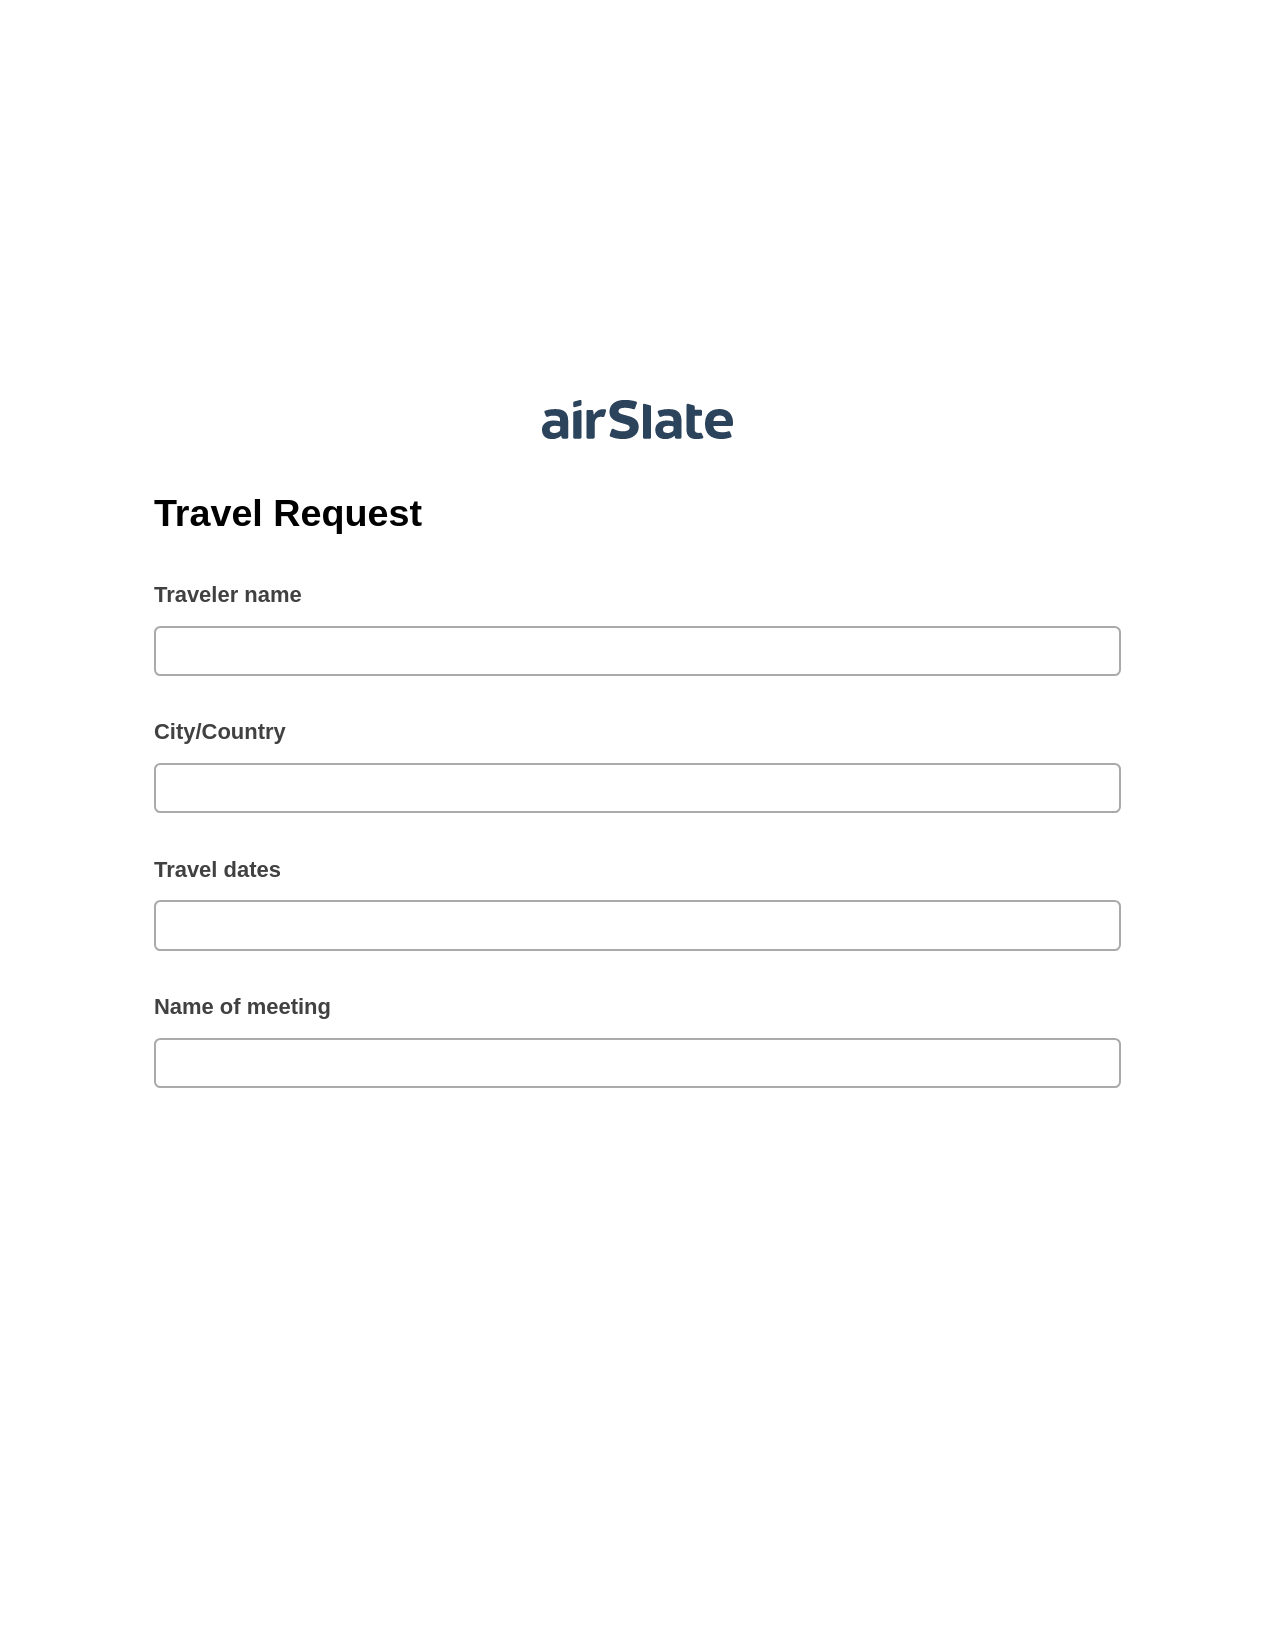 Travel Request Pre-fill from Google Sheets Bot, Create slate addon, Export to Smartsheet